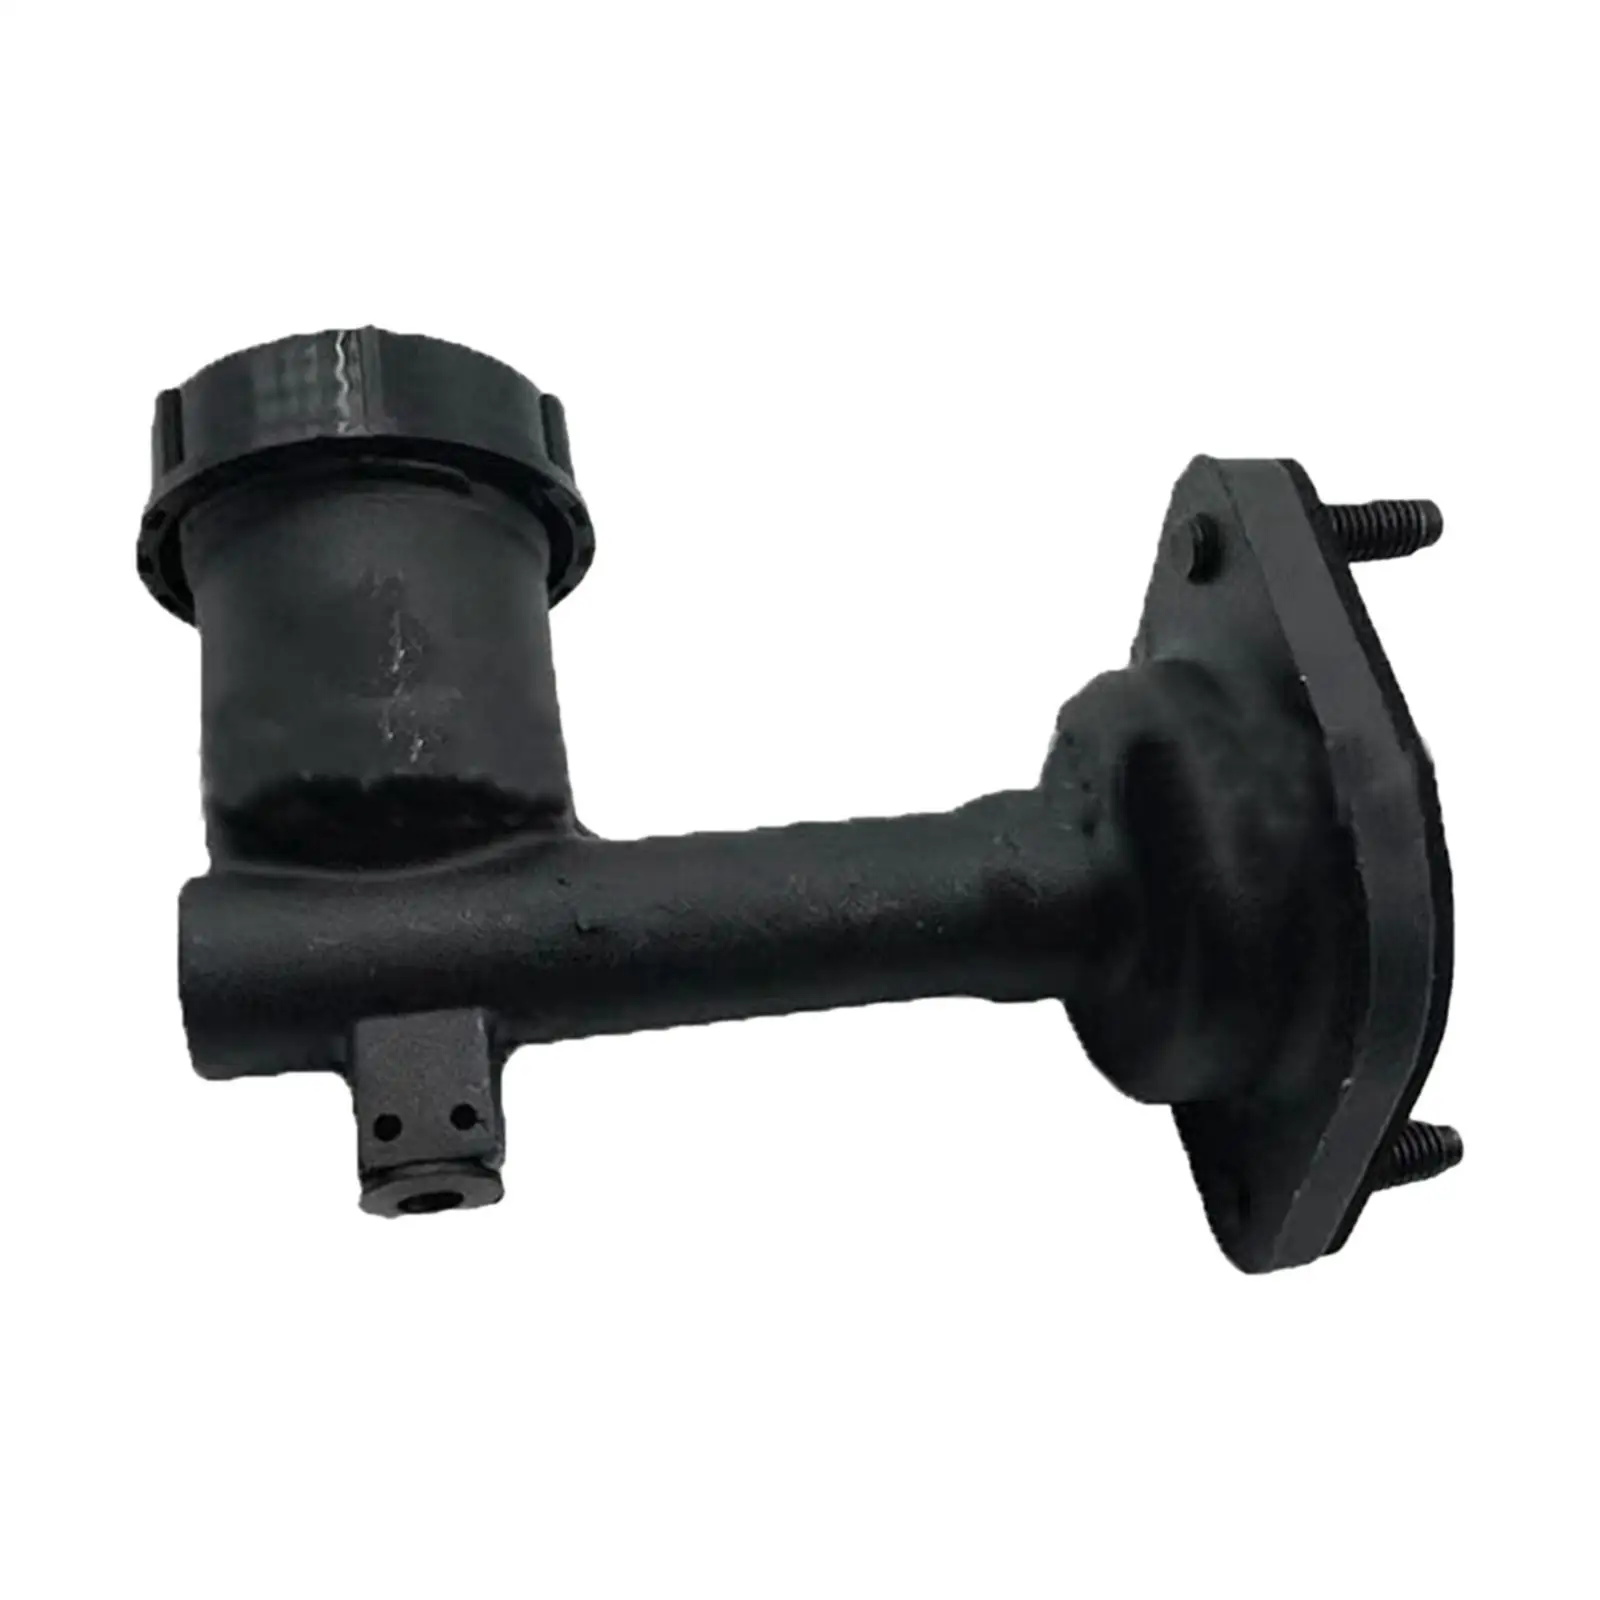 

Car Brake Clutch Master Cylinder Easy Installation Quality Replacement Professional 52107652ag 4636864 for Yj